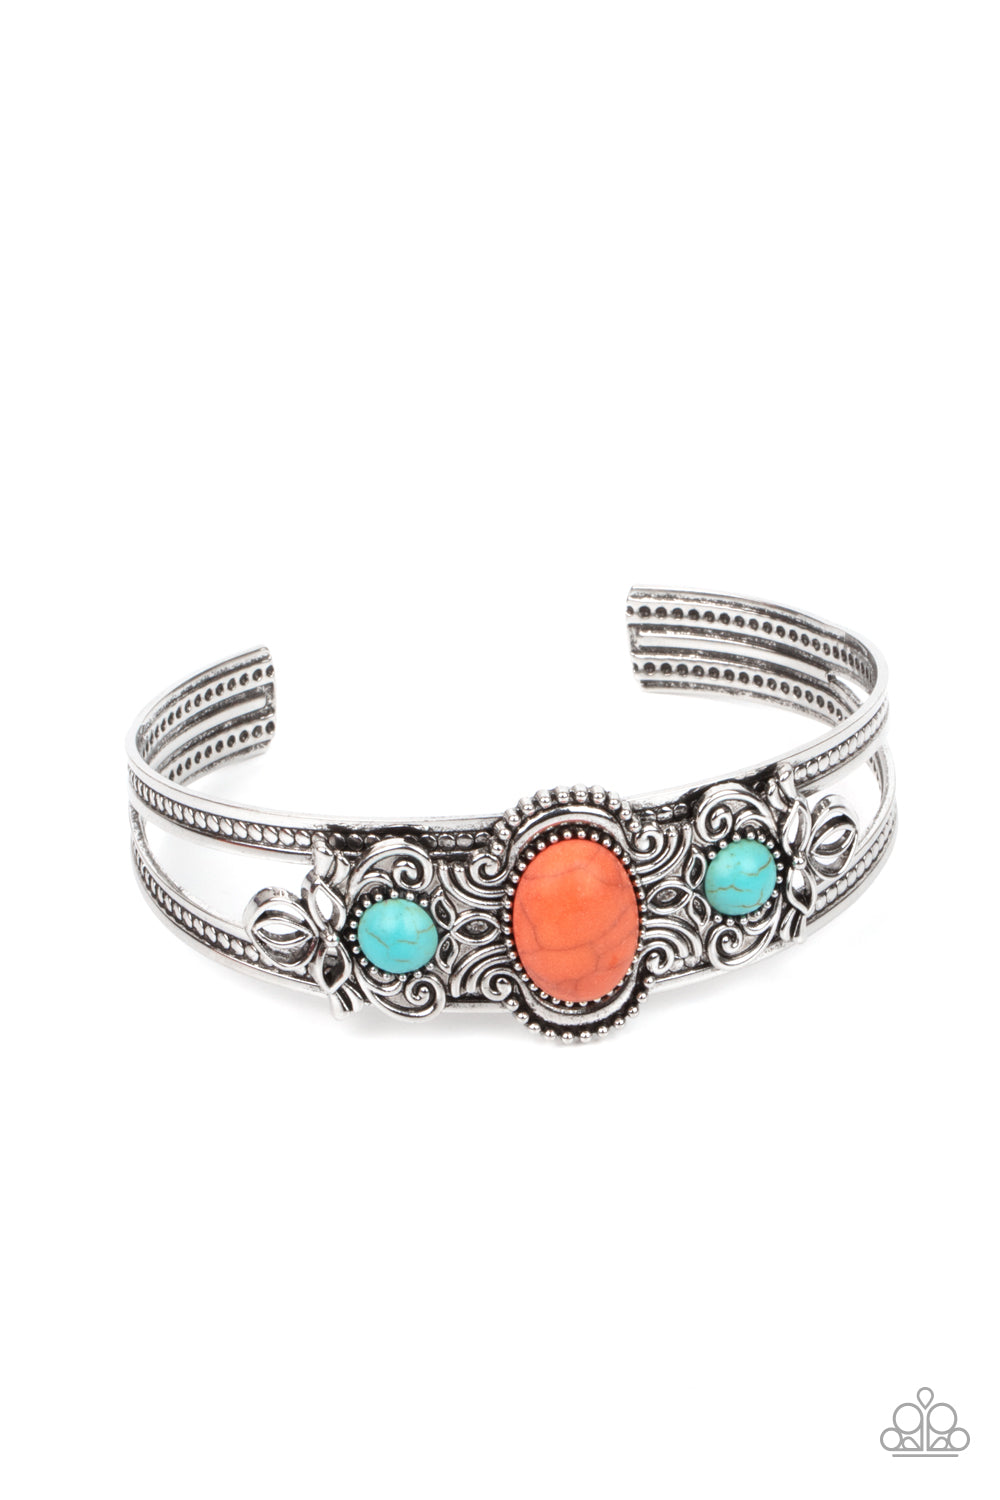 Dotted with a pair of turquoise stone beads, silver floral filigree blooms out from an oval orange stone centerpiece atop a studded silver cuff.